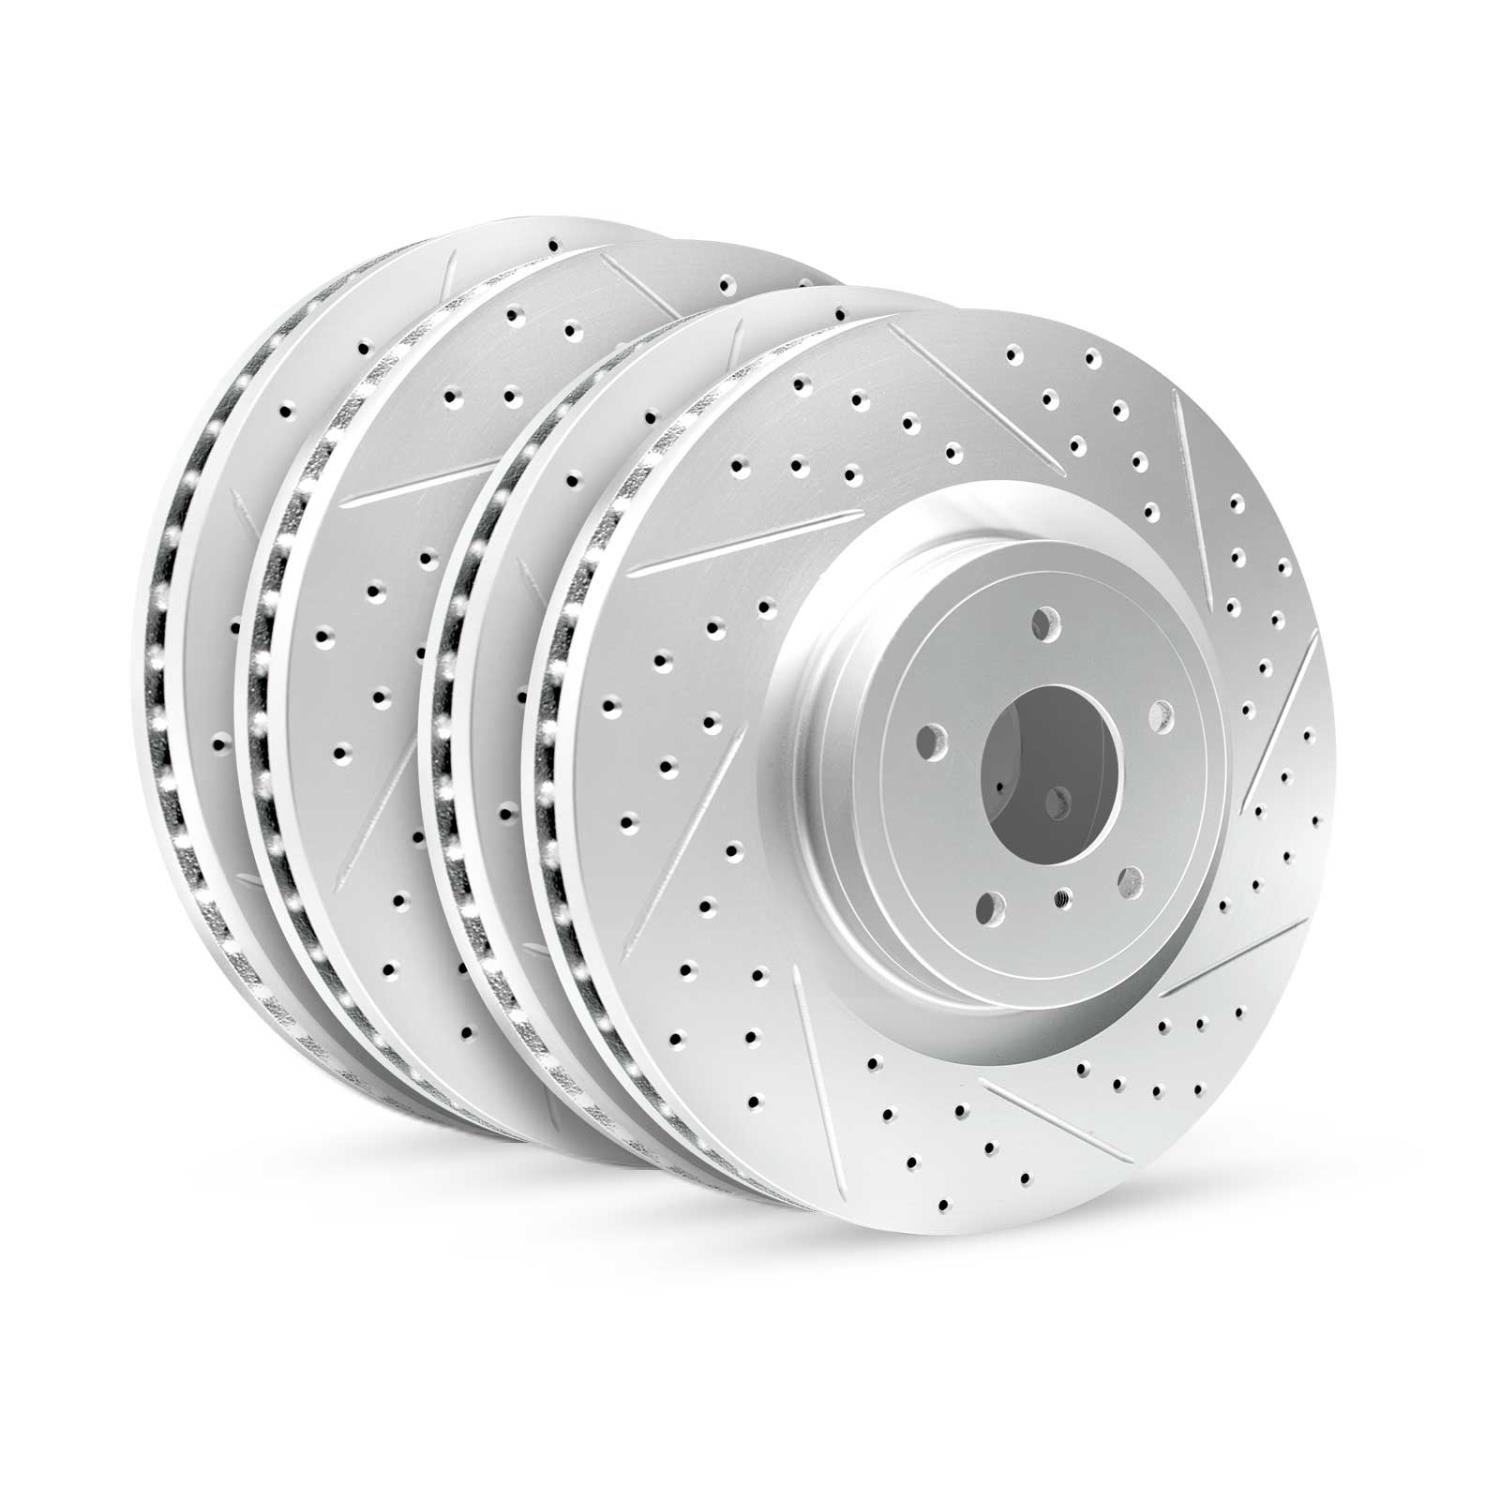 GEO-Carbon Drilled/Slotted Rotors, 2003-2005 Infiniti/Nissan, Position: Front/Rear